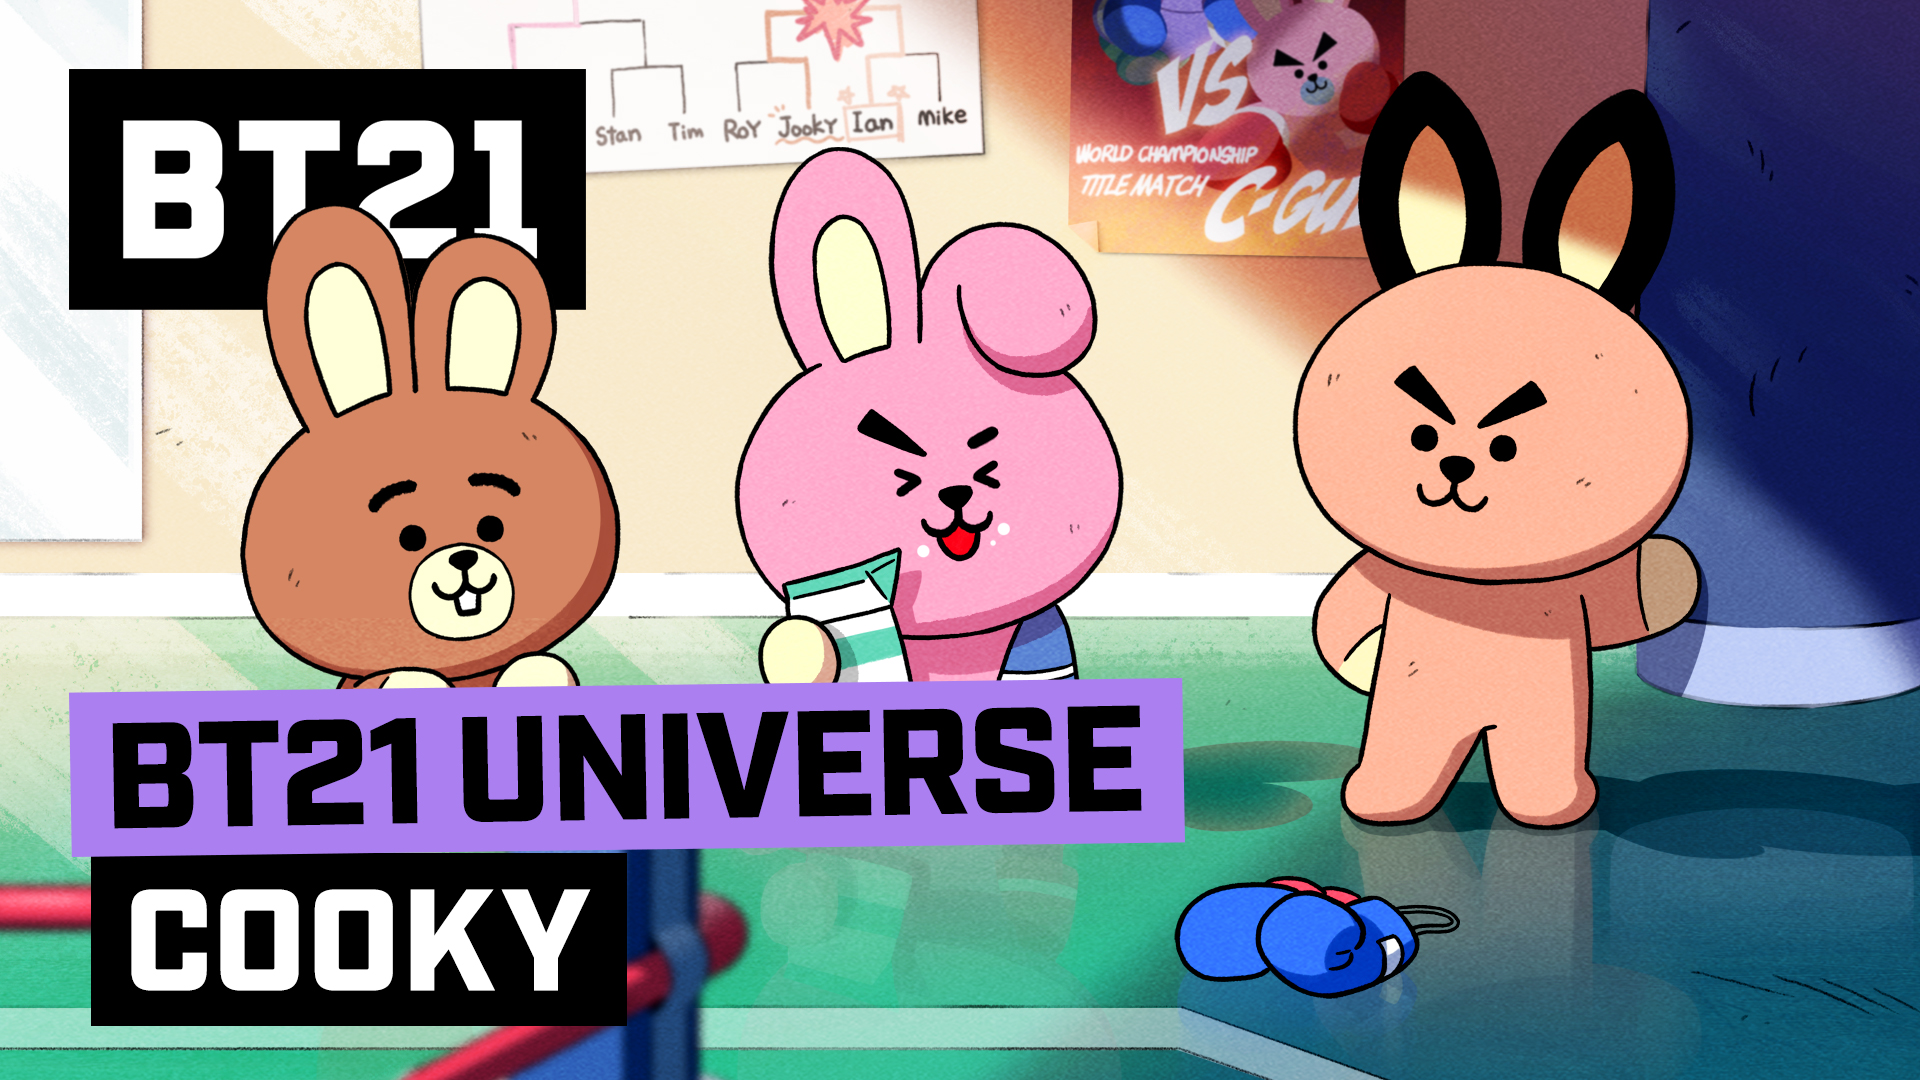 [BT21] BT21 UNIVERSE ANIMATION EP.04 - COOKY